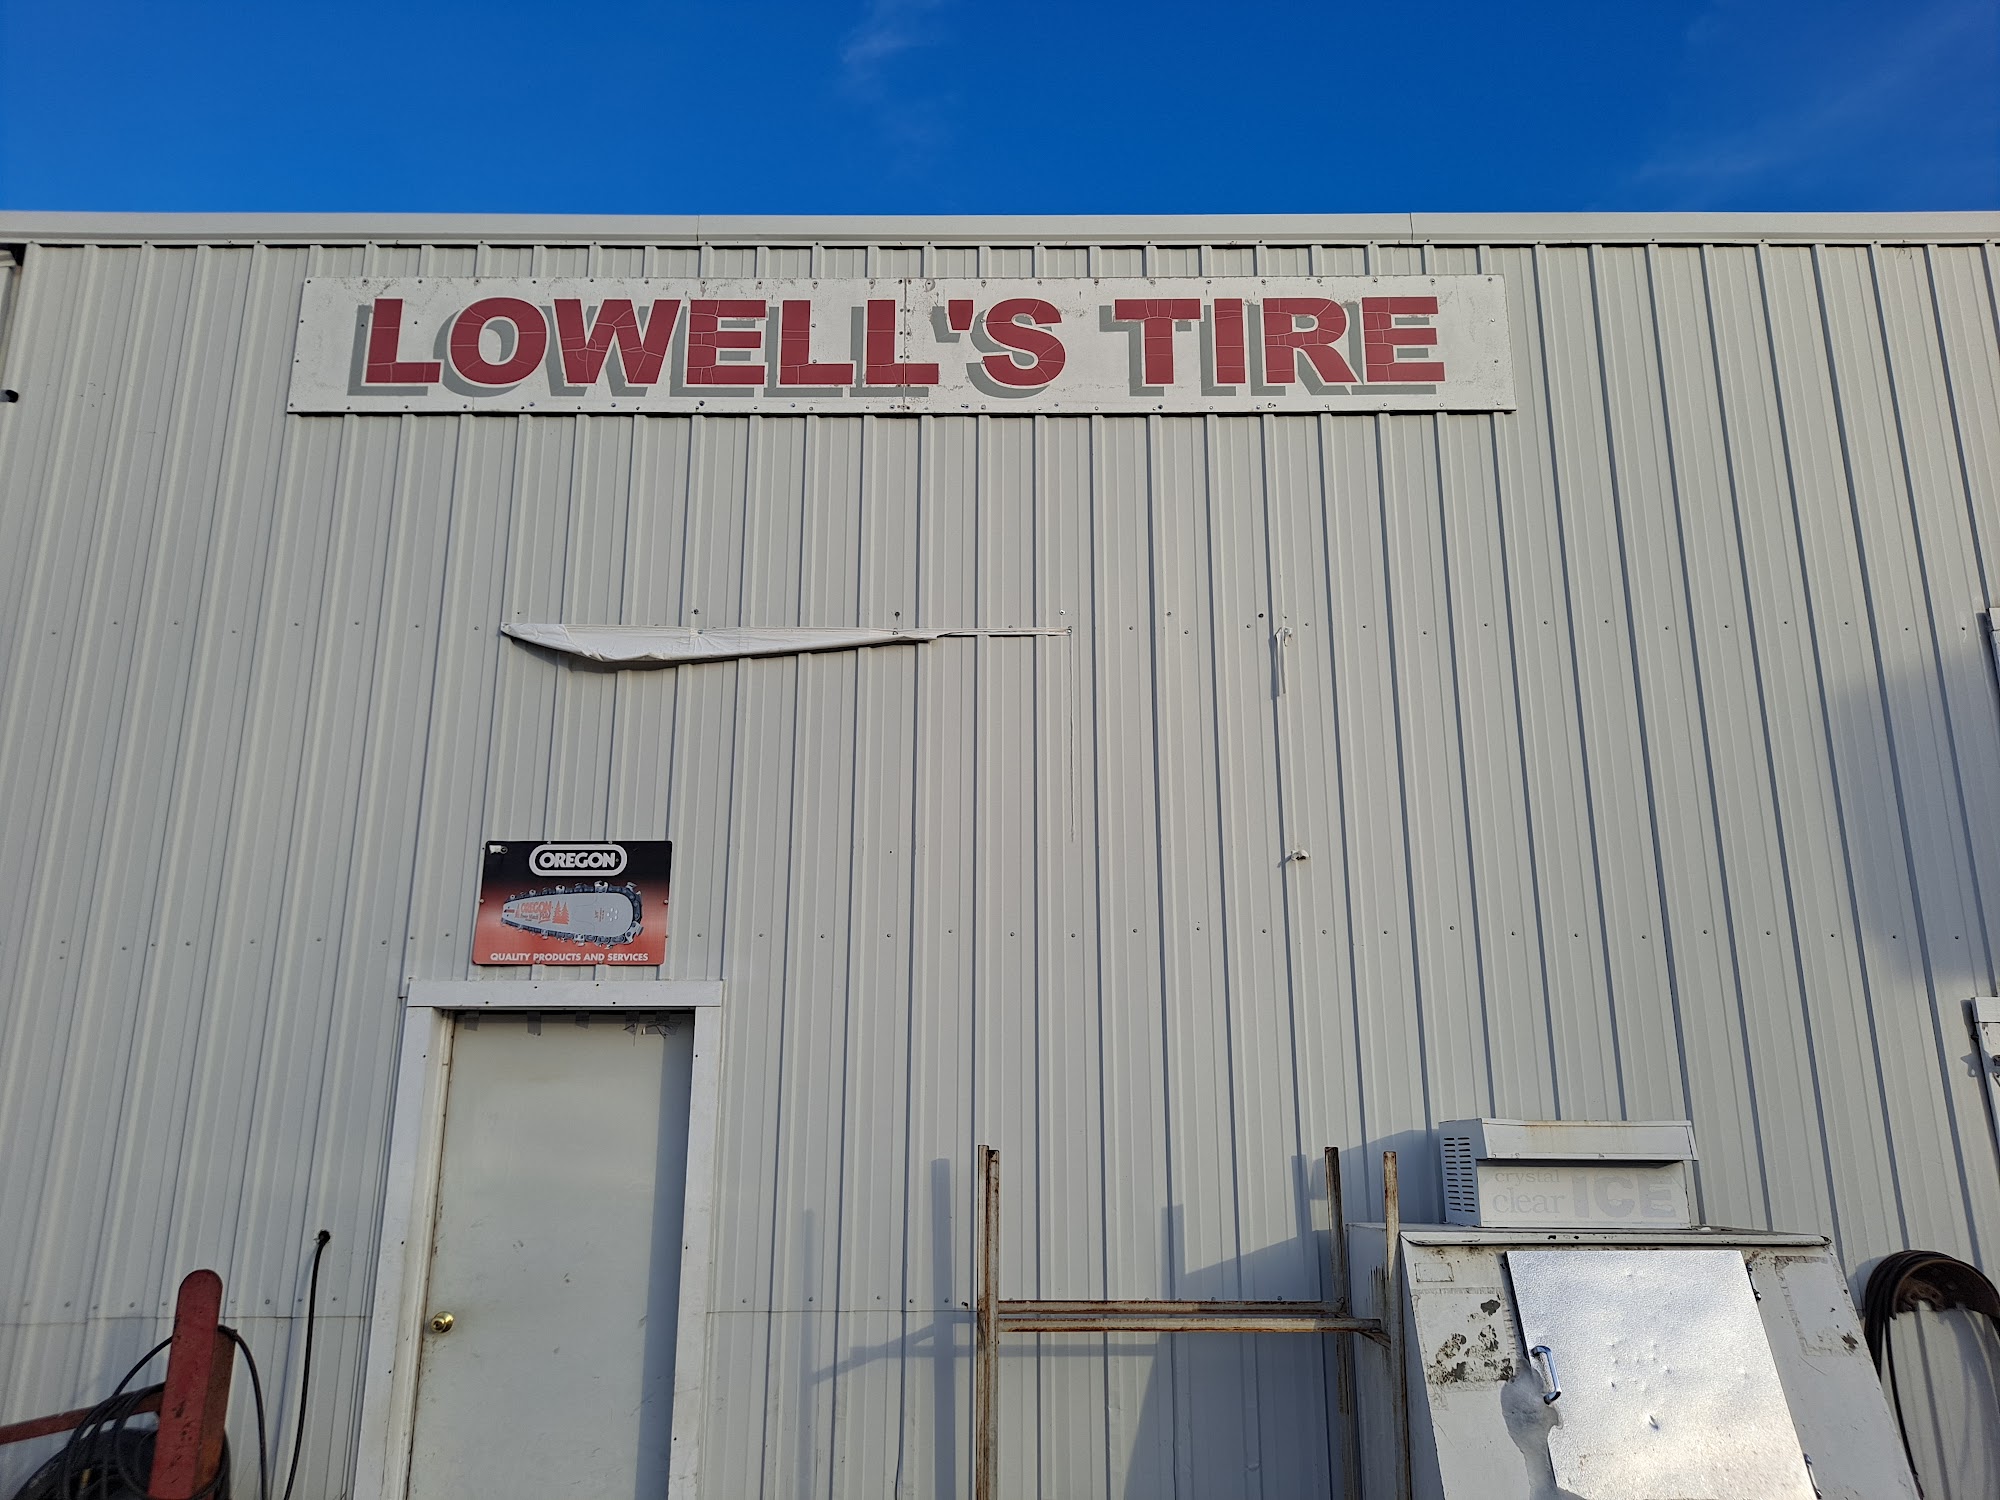 Lowell's Tire